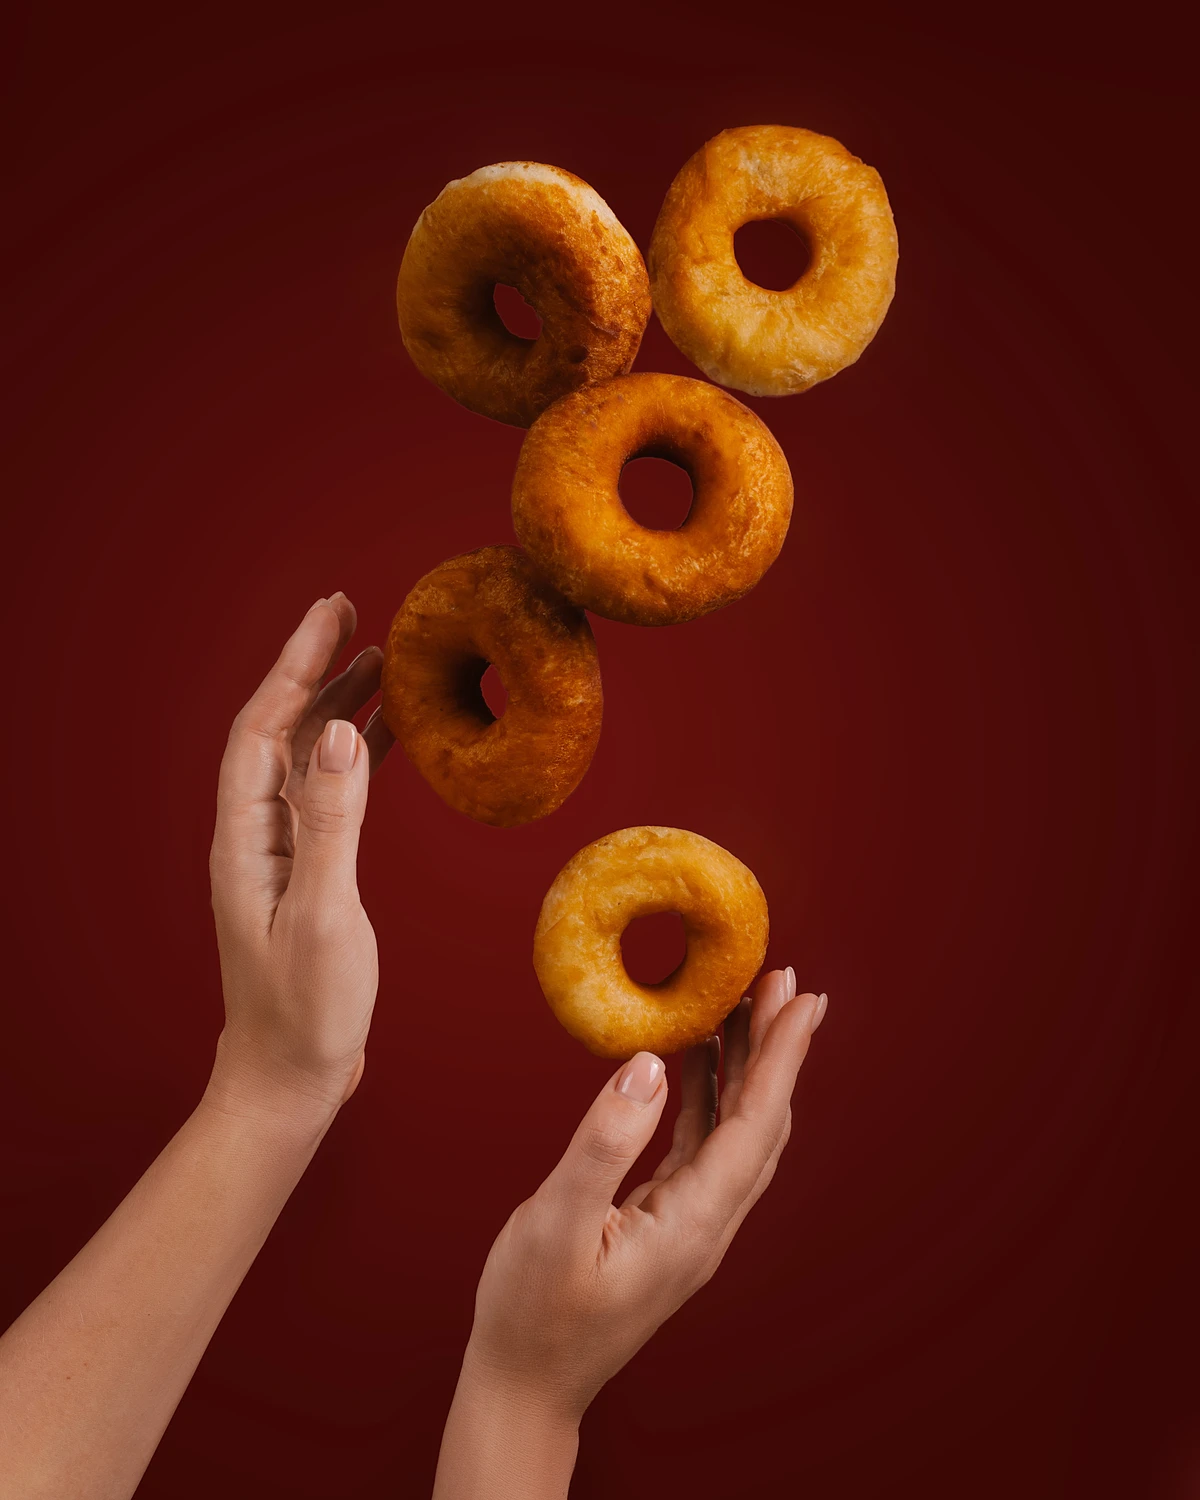 Donuts hung in the air The photo shows female hands and donuts flying in the air above them.